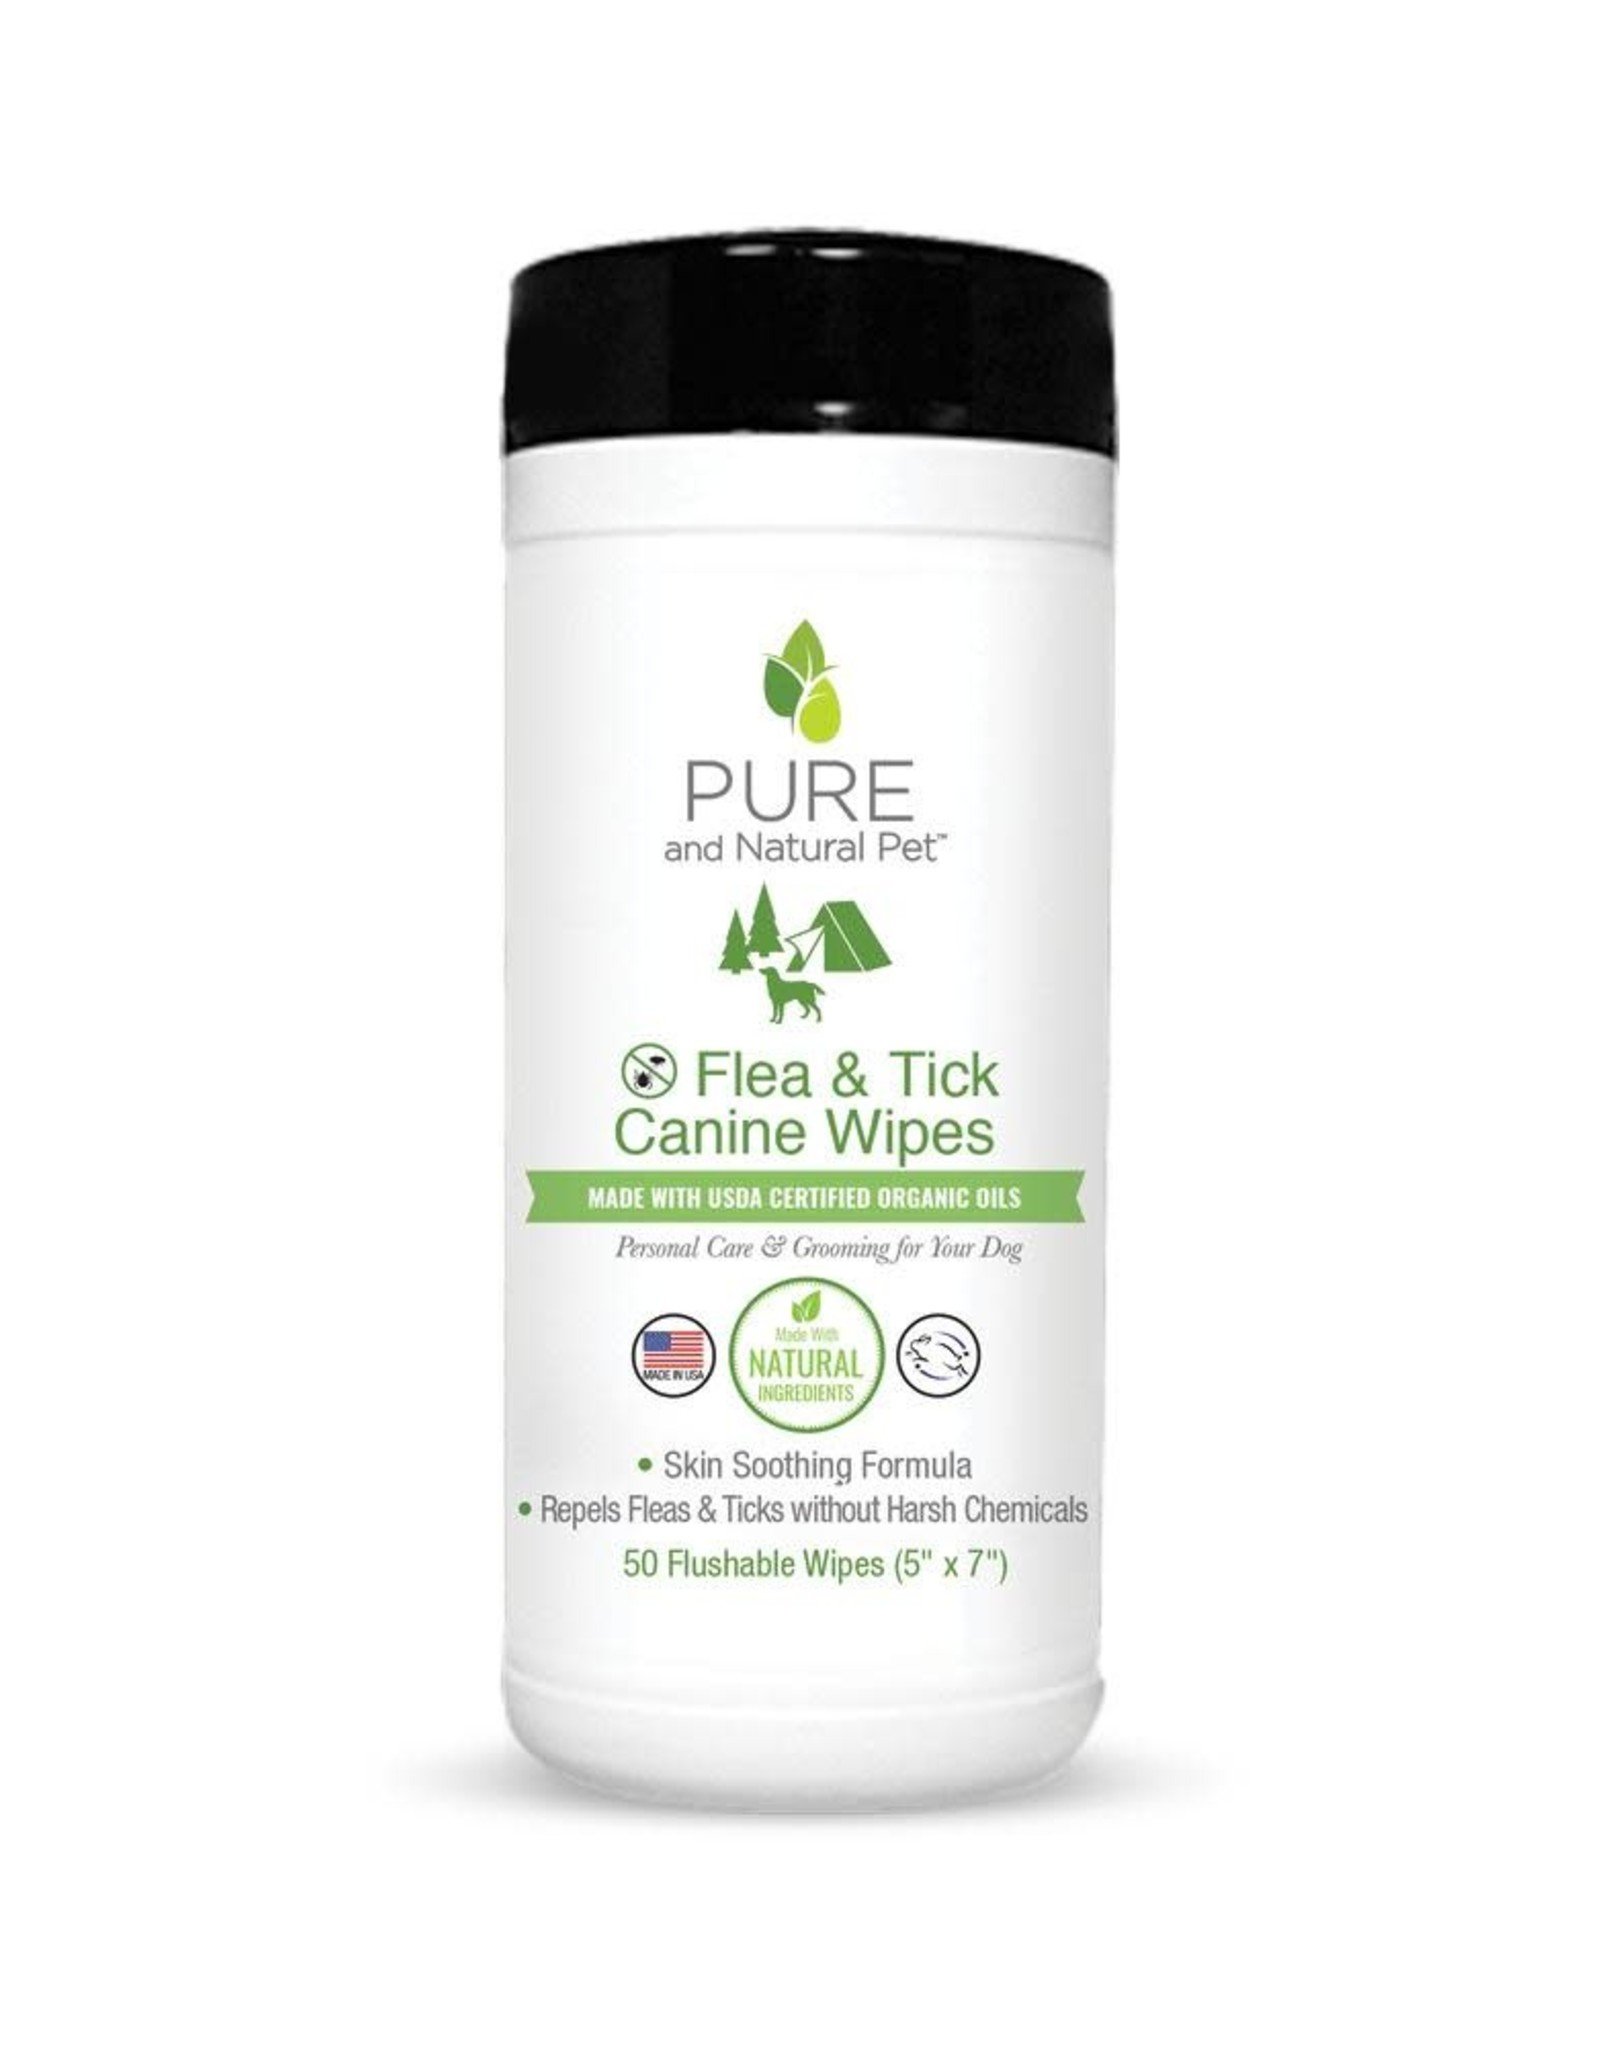 Pure and Natural Pet Flea & Tick Canine Wipes